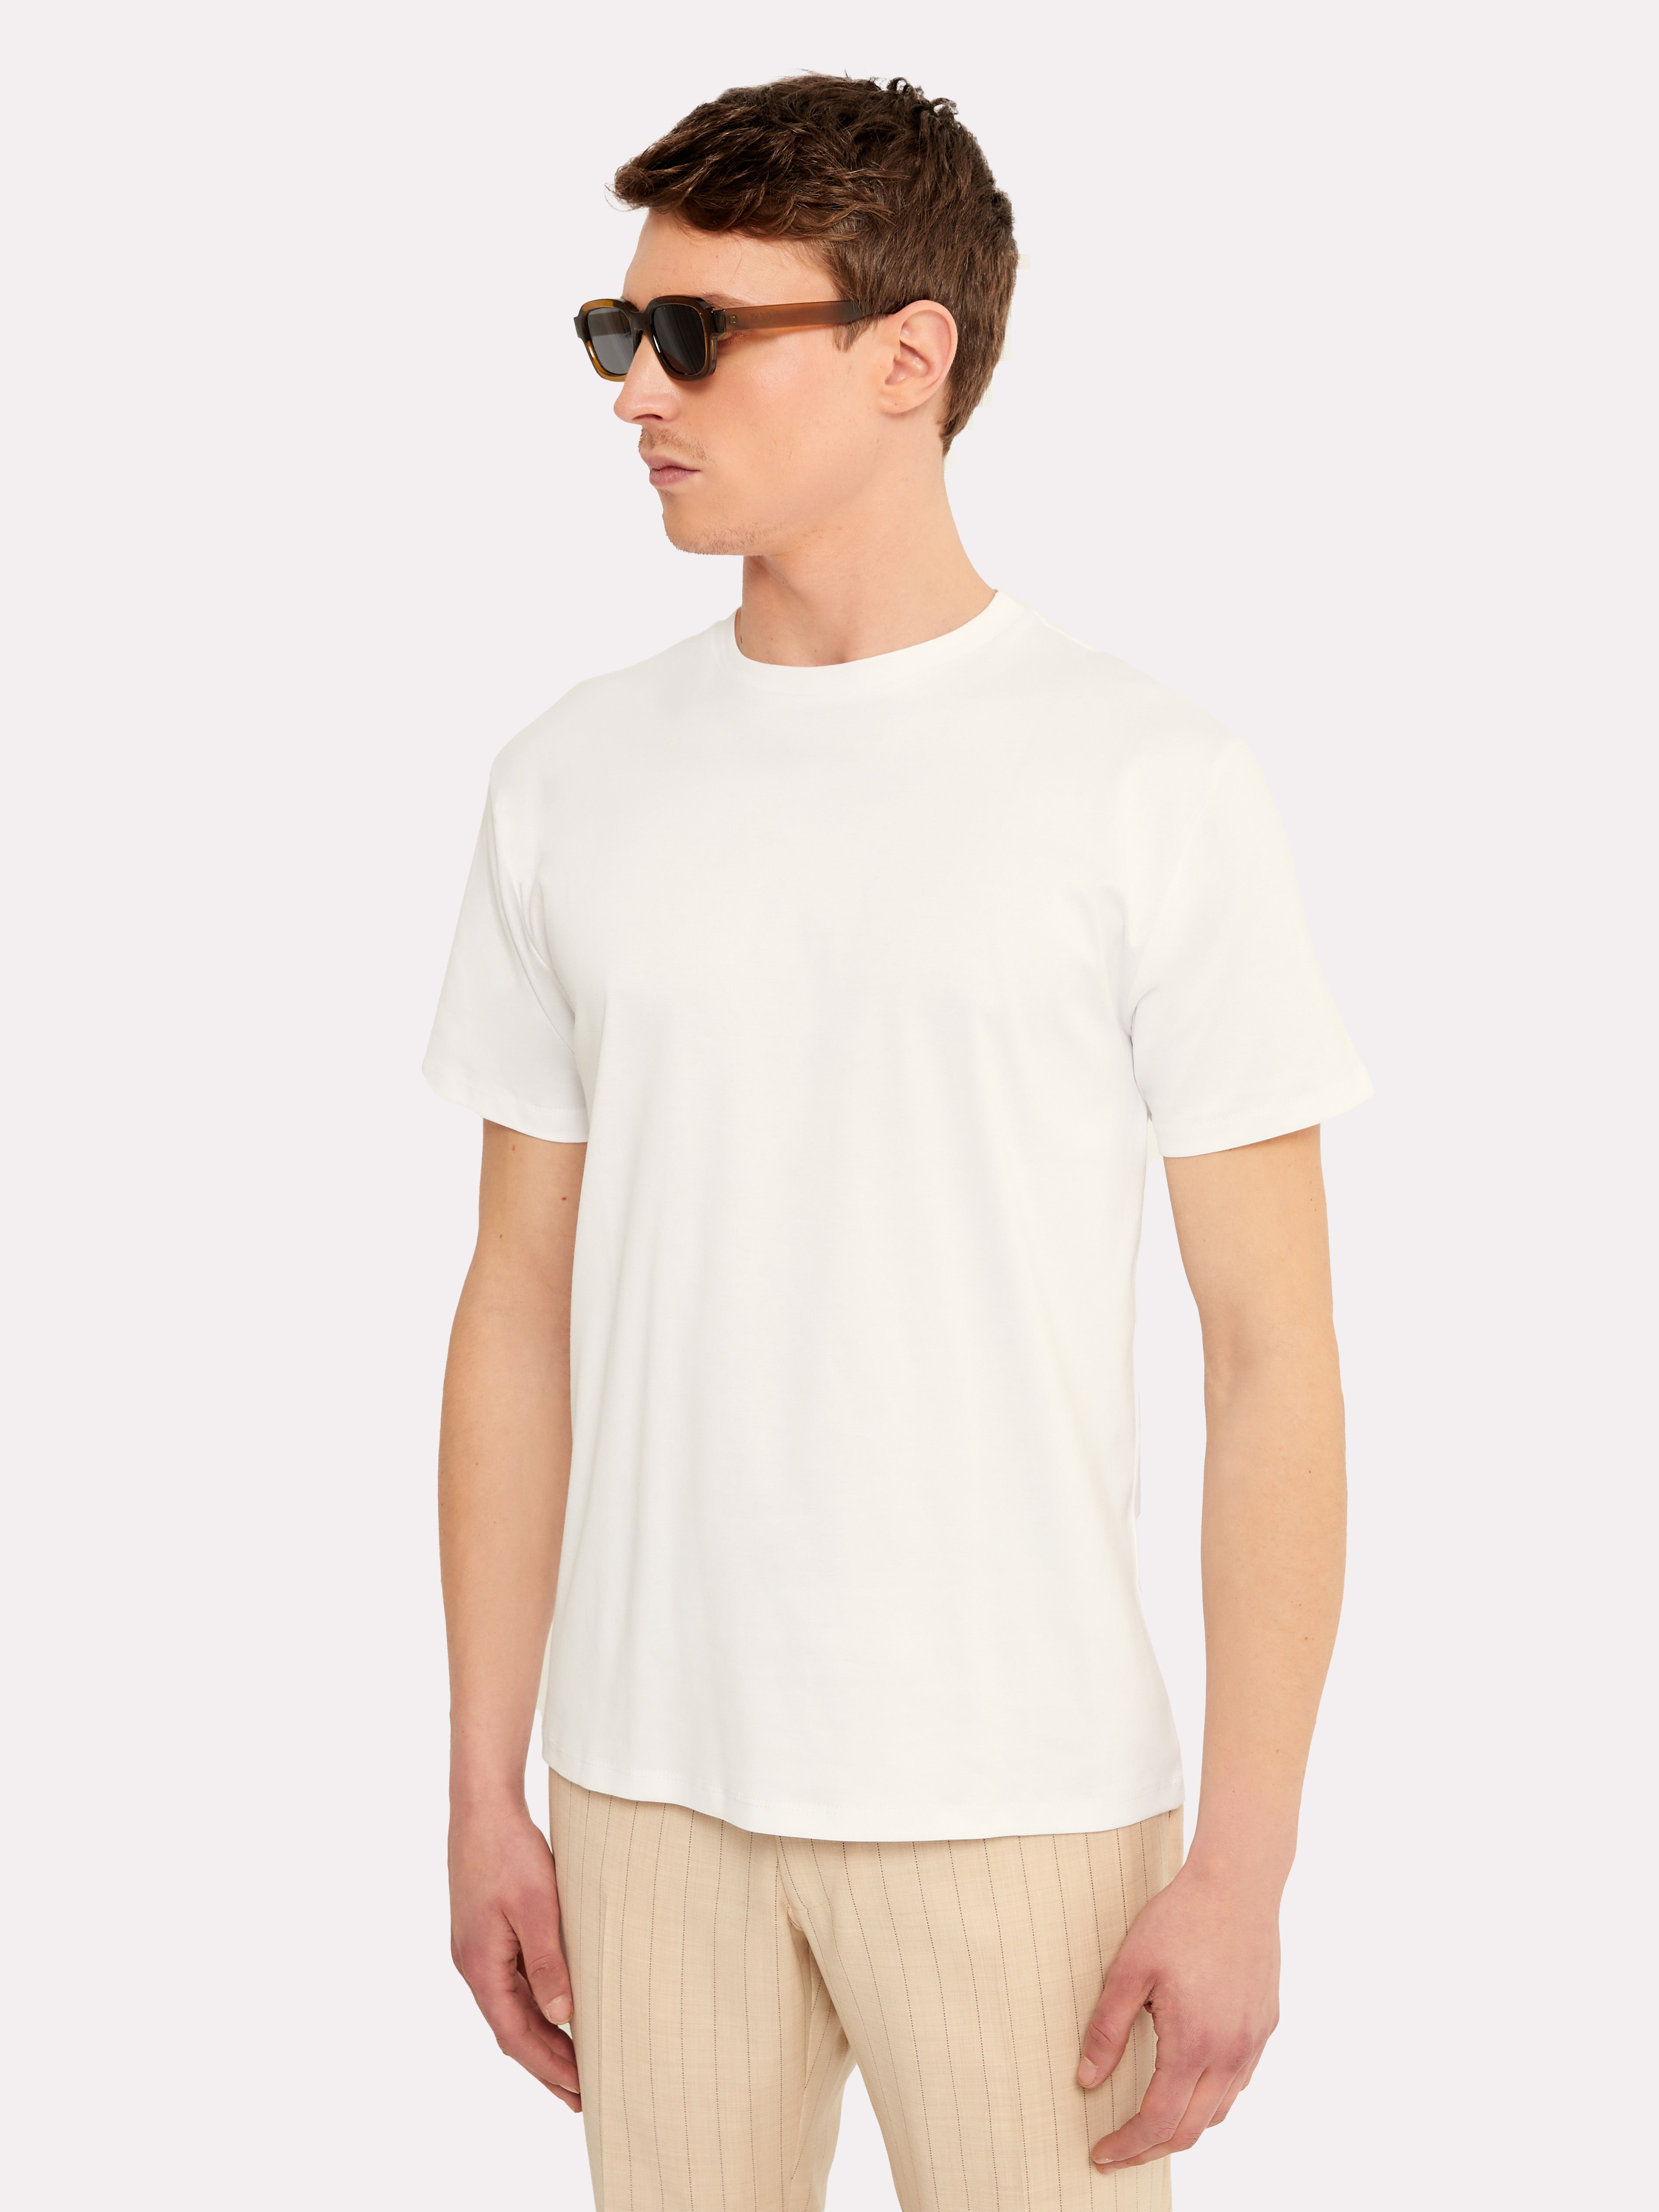 White cotton t-shirt with octagon